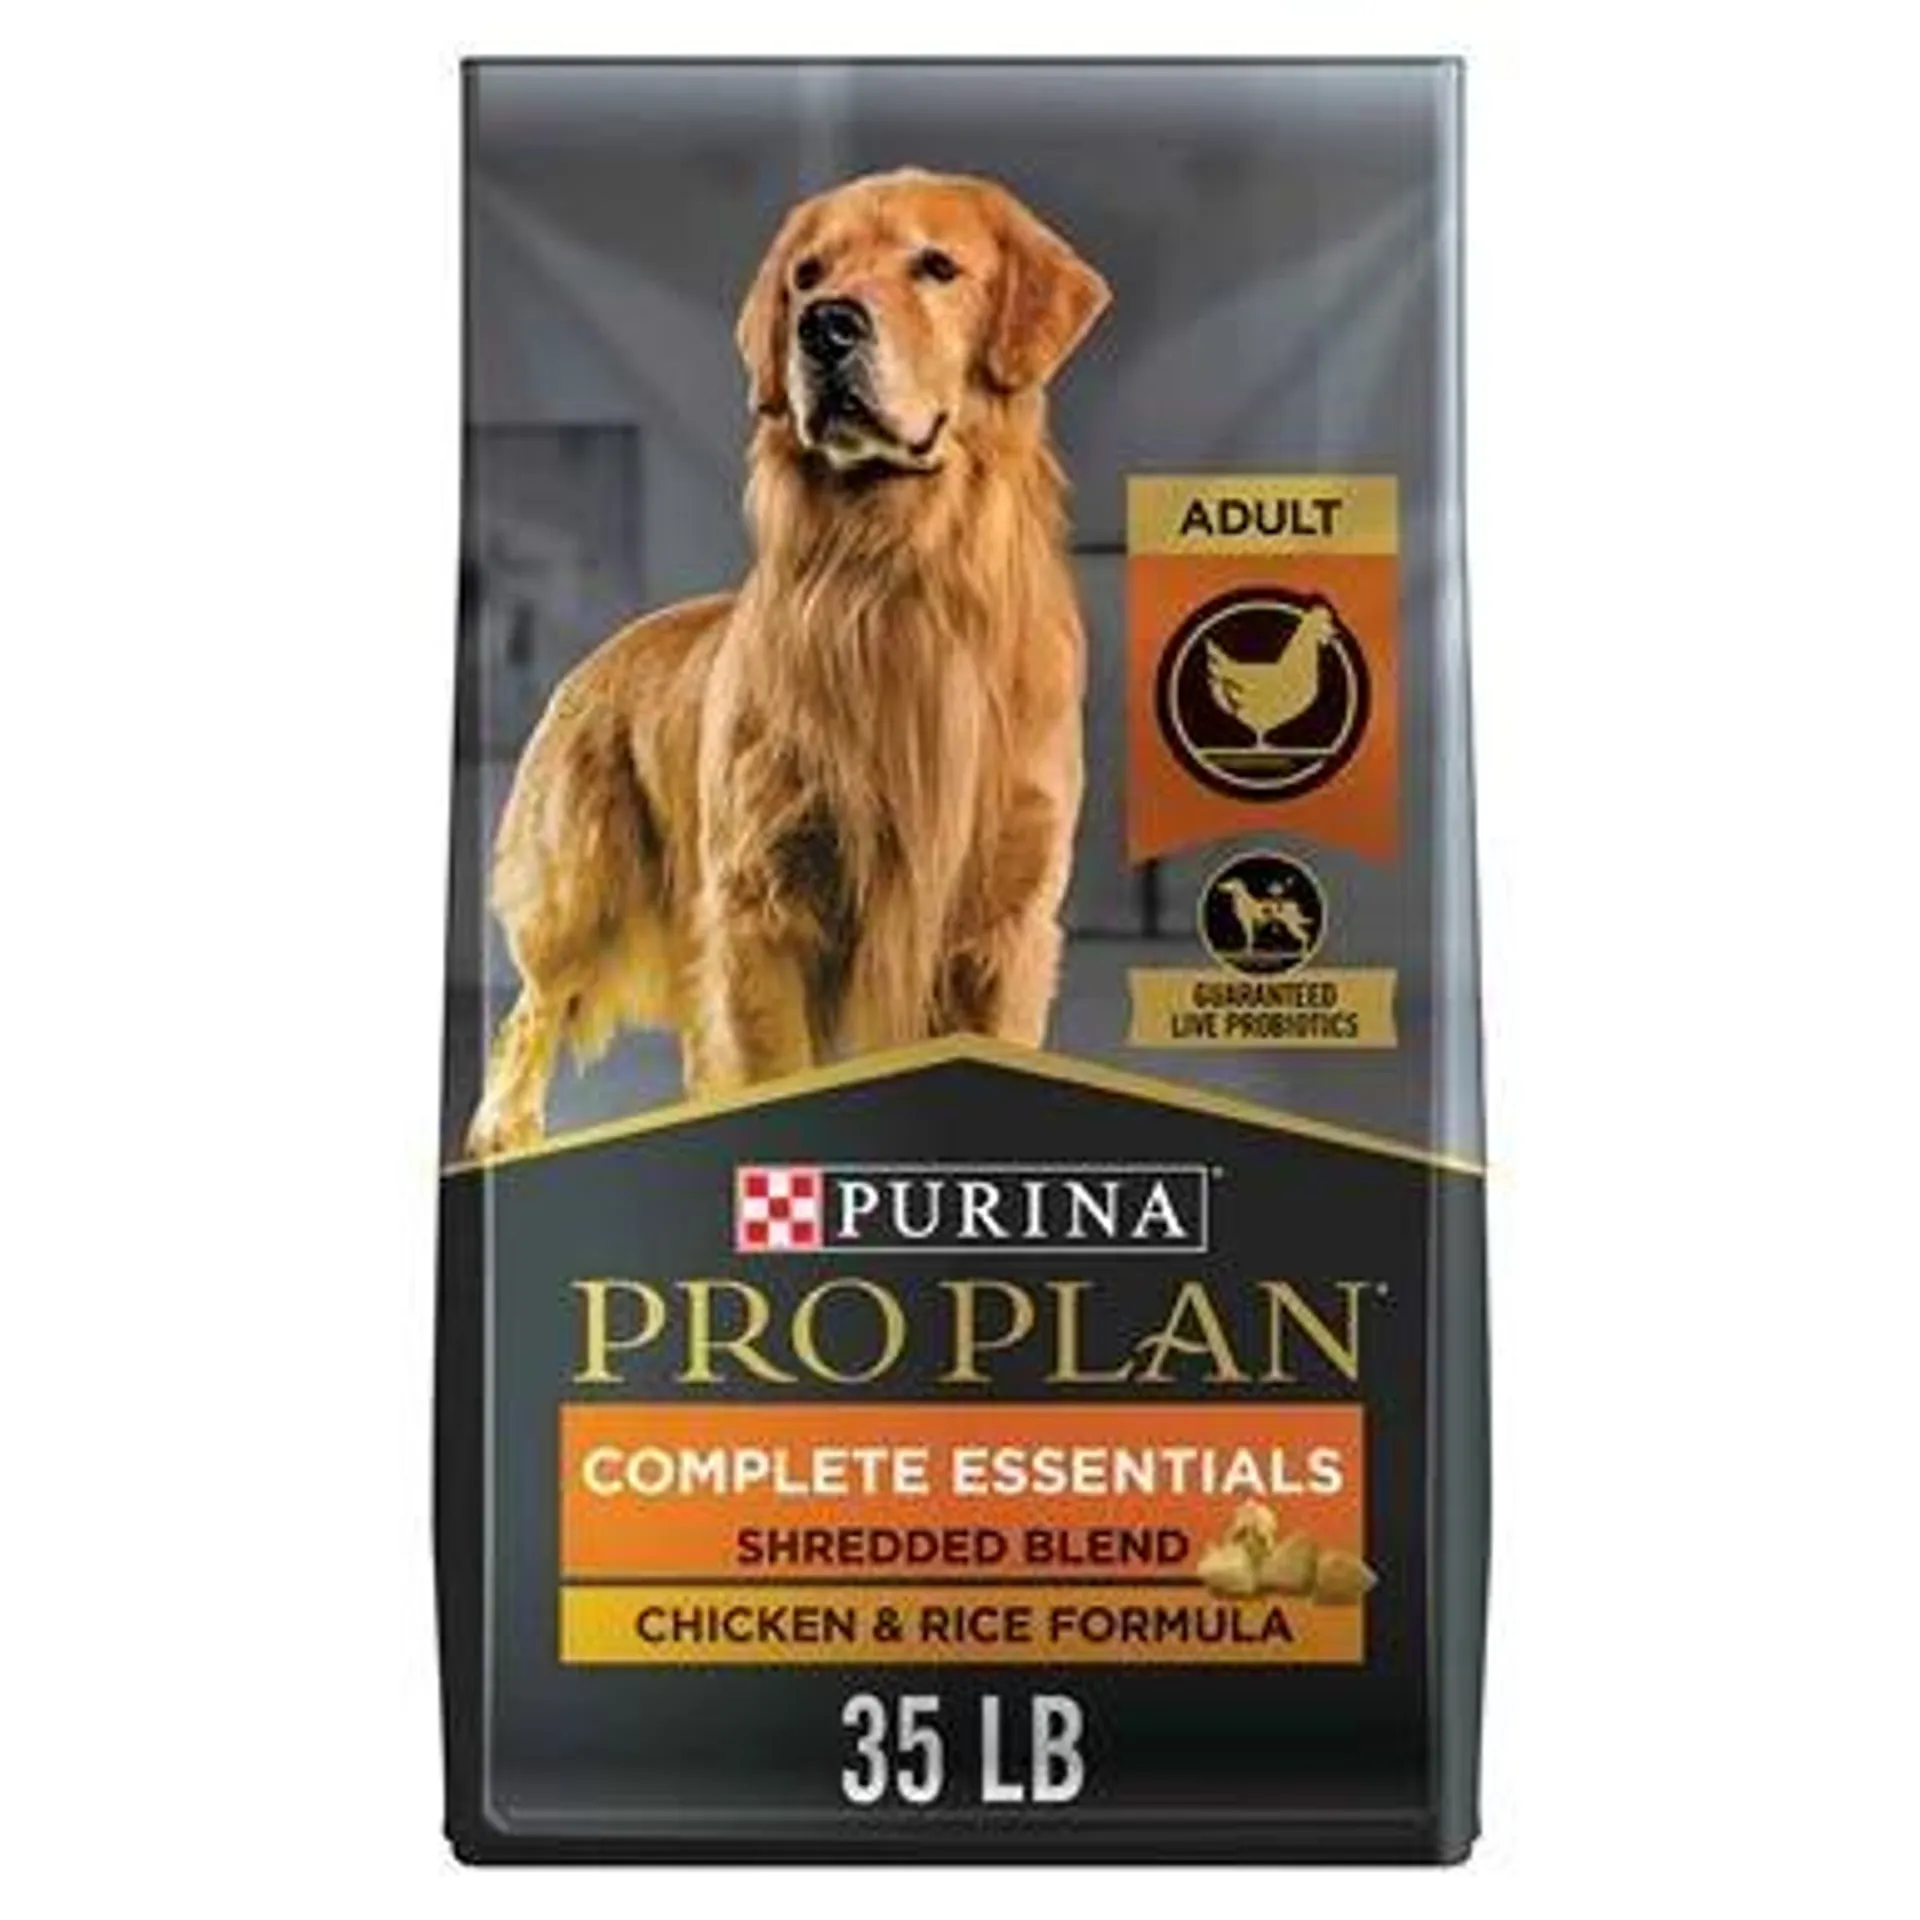 Purina Pro Plan High Protein Dog Food With Probiotics for Dogs, Shredded Blend Chicken & Rice Formula - 35 Pound Bag